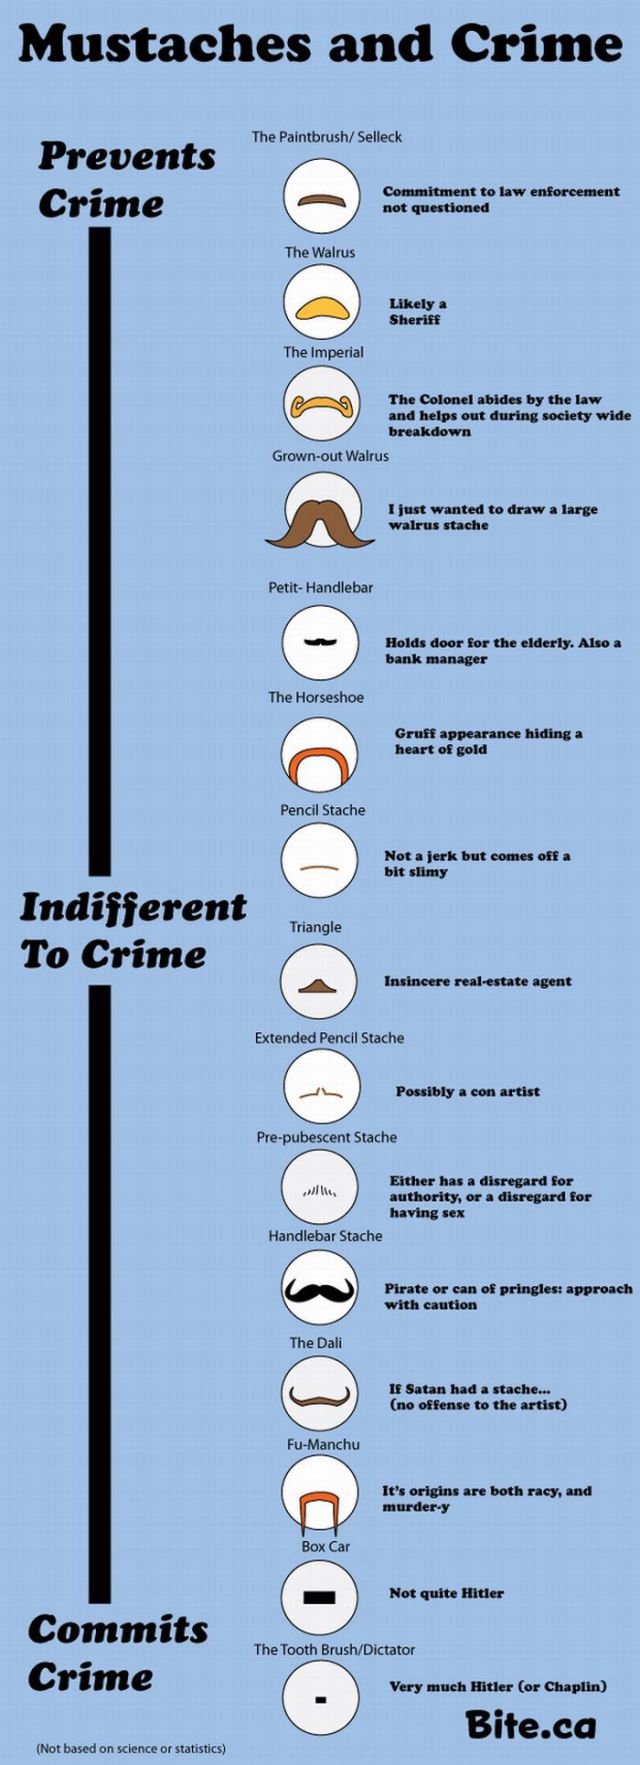 How Mustaches Affect Crime